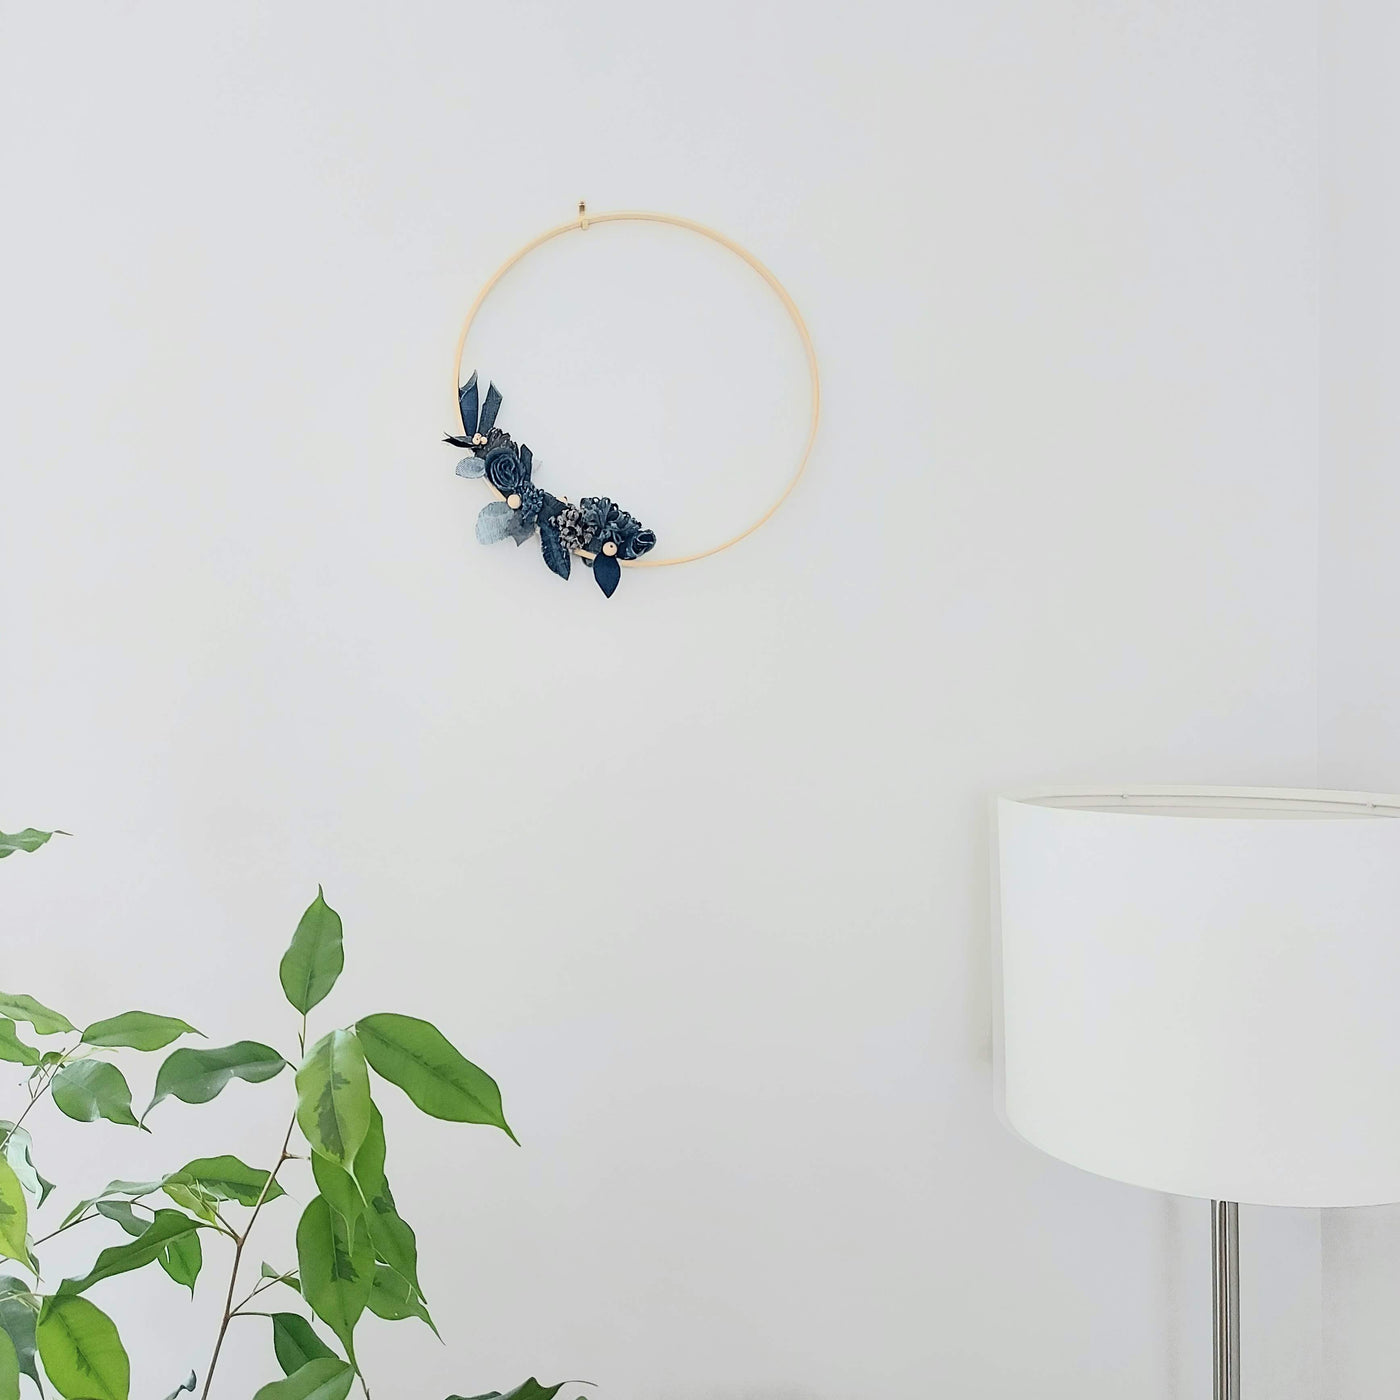 Bamboo and recycled denim decorative wreath - XL - 5